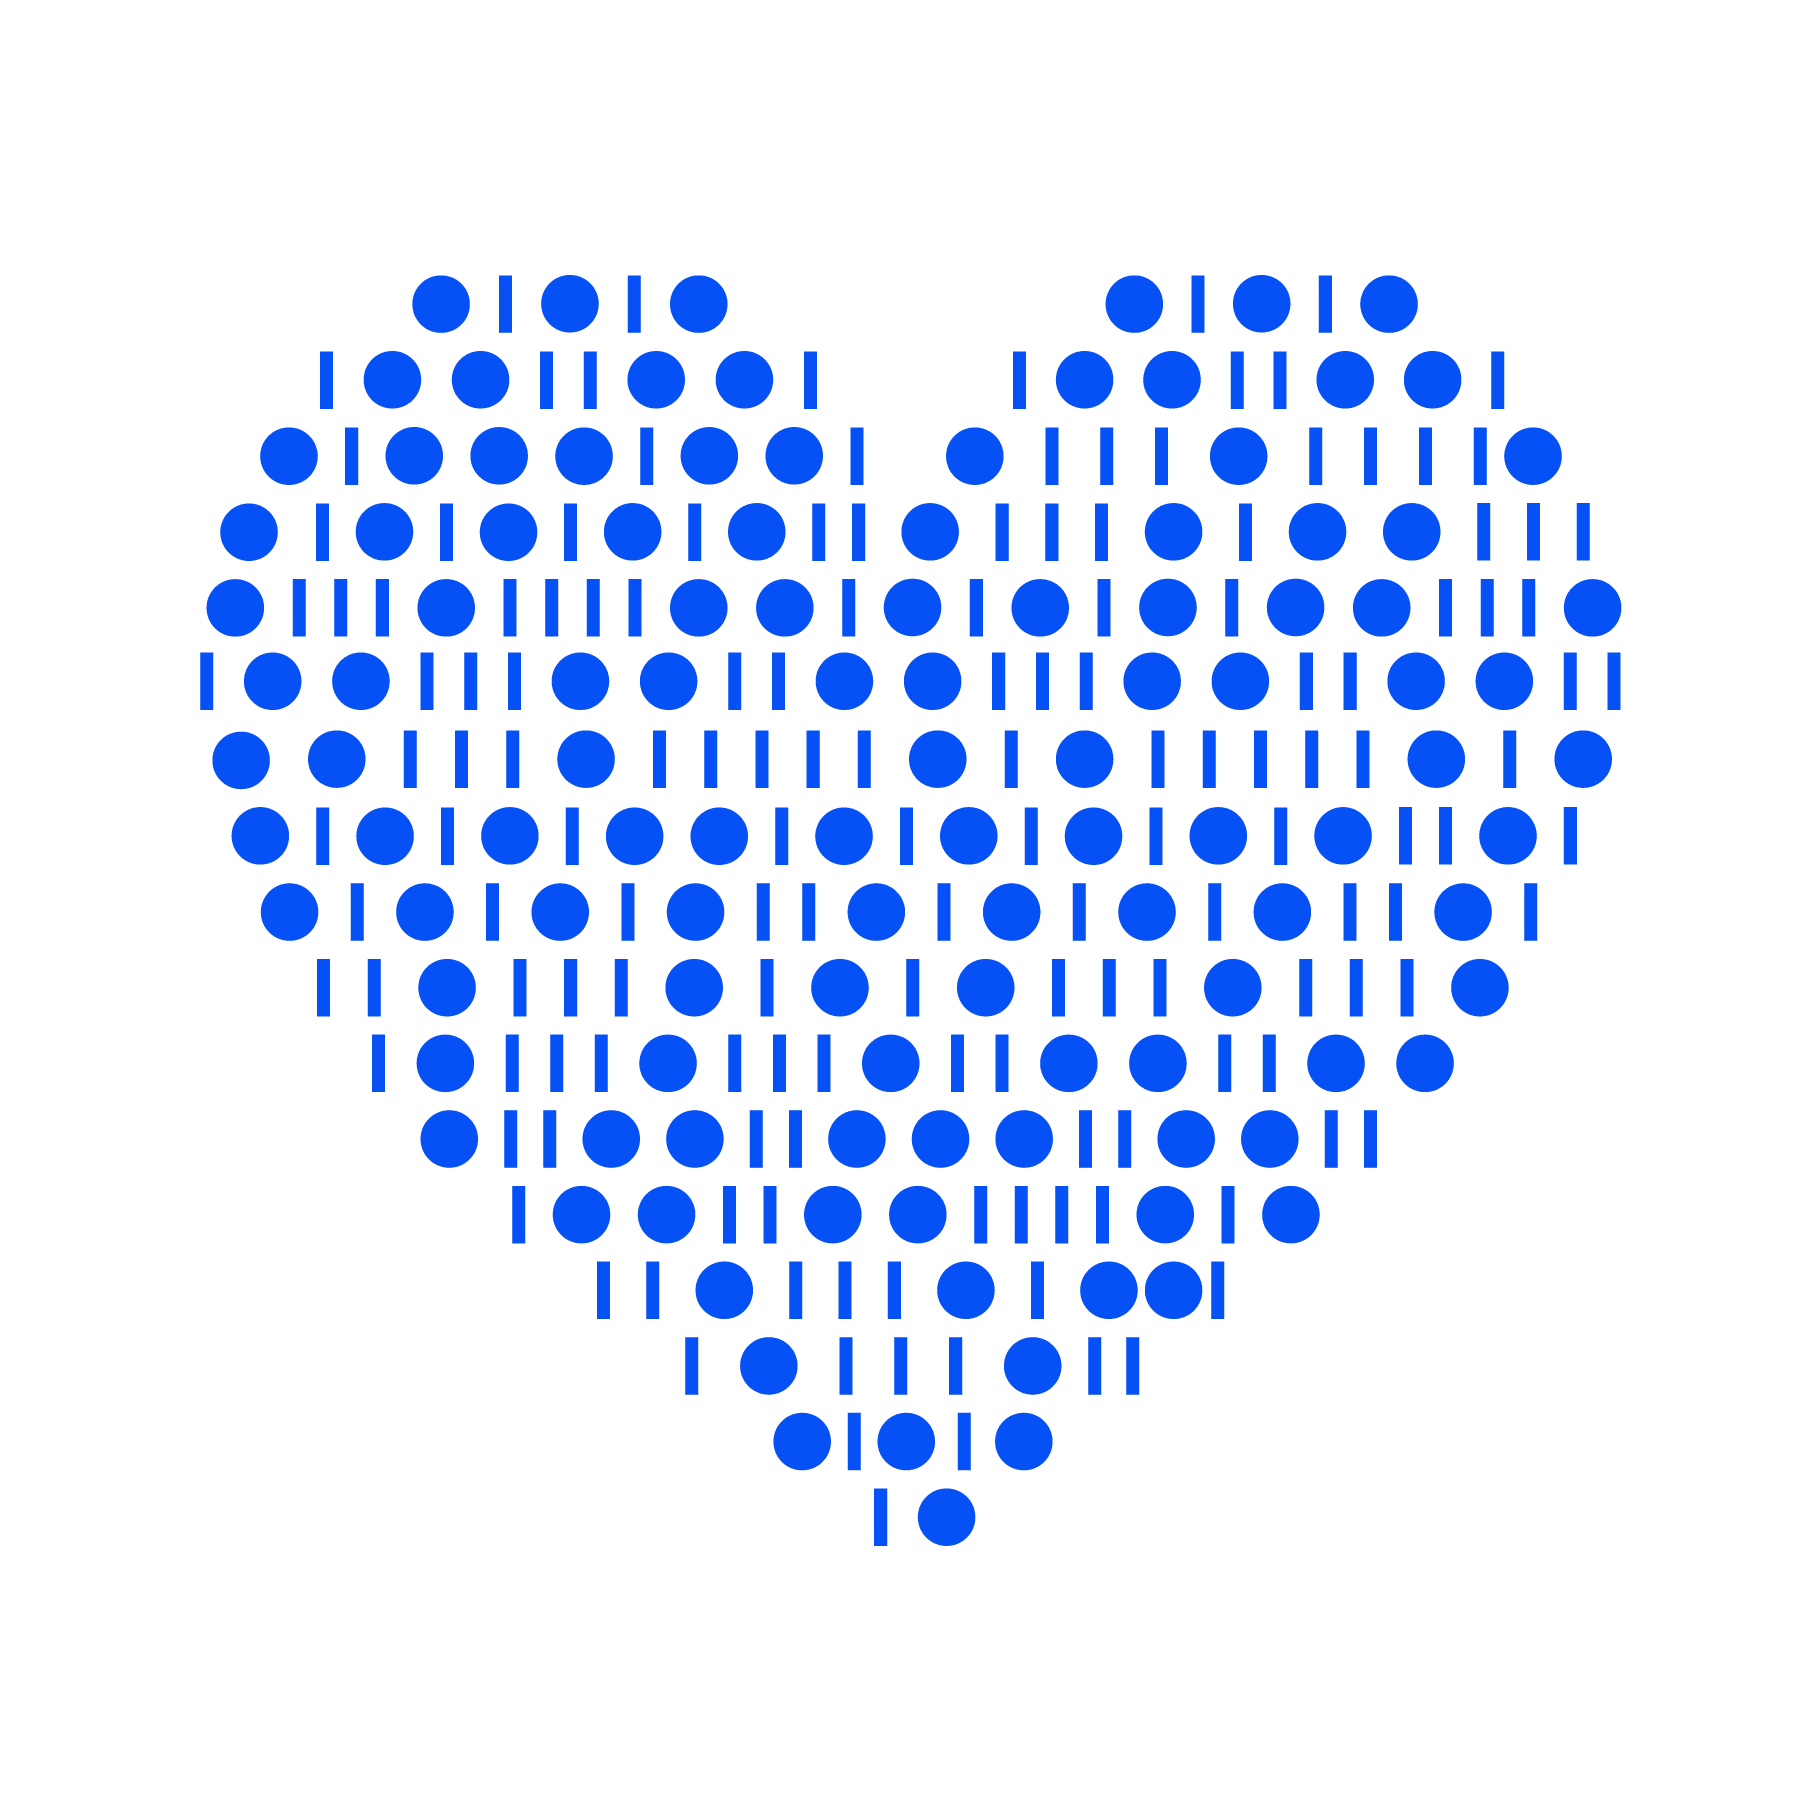 Blue heart shape created with binary code on white background